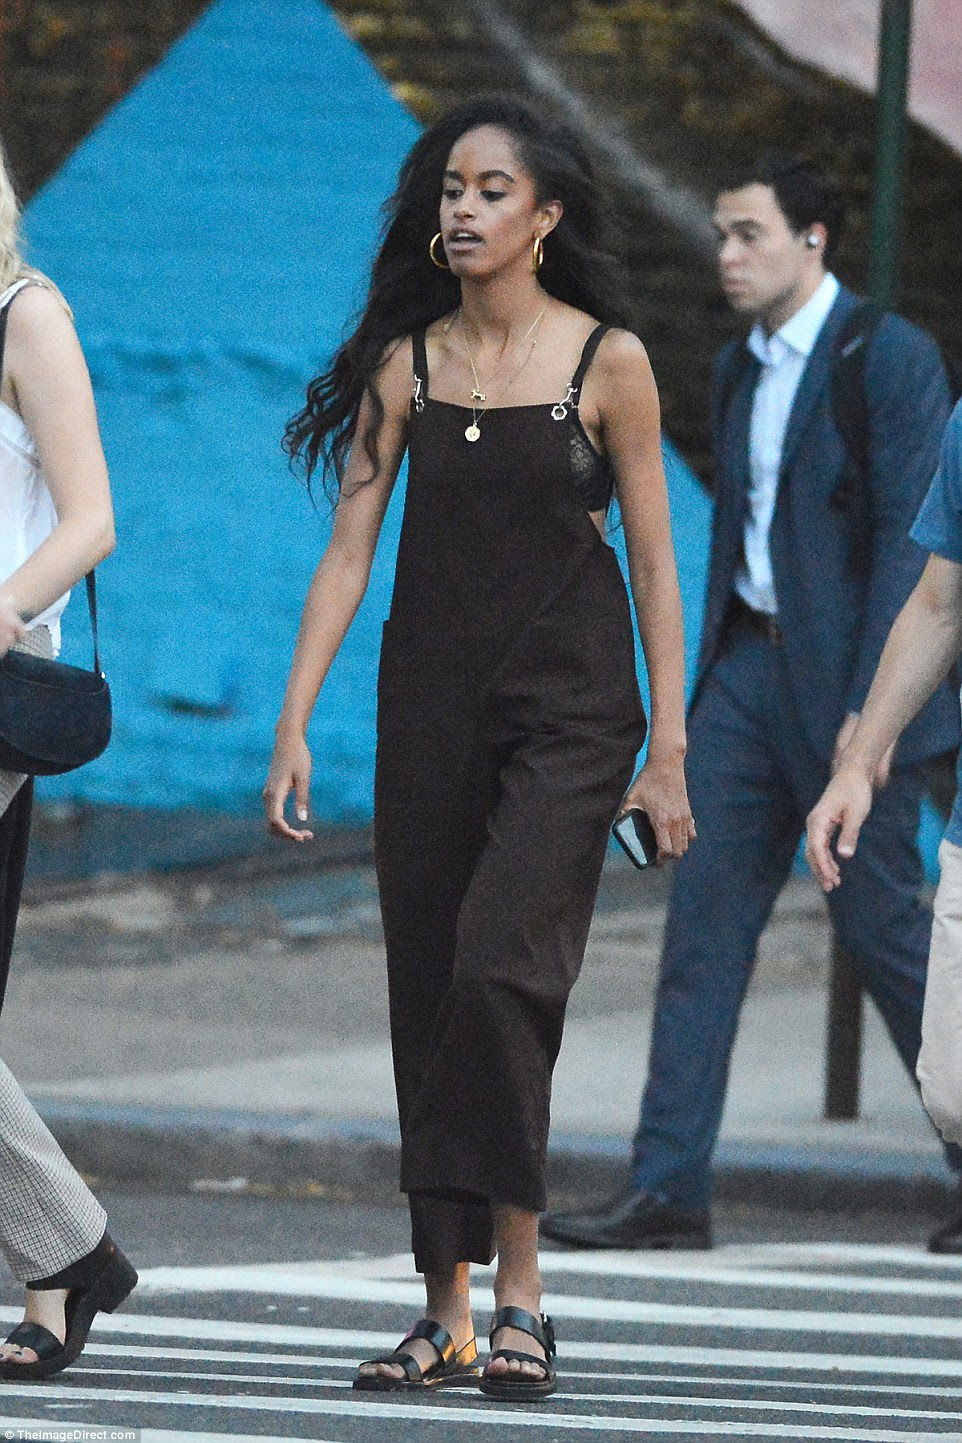 Malia Obama has now returned the USA and was spotted out in New York City on Thursday with her friends  